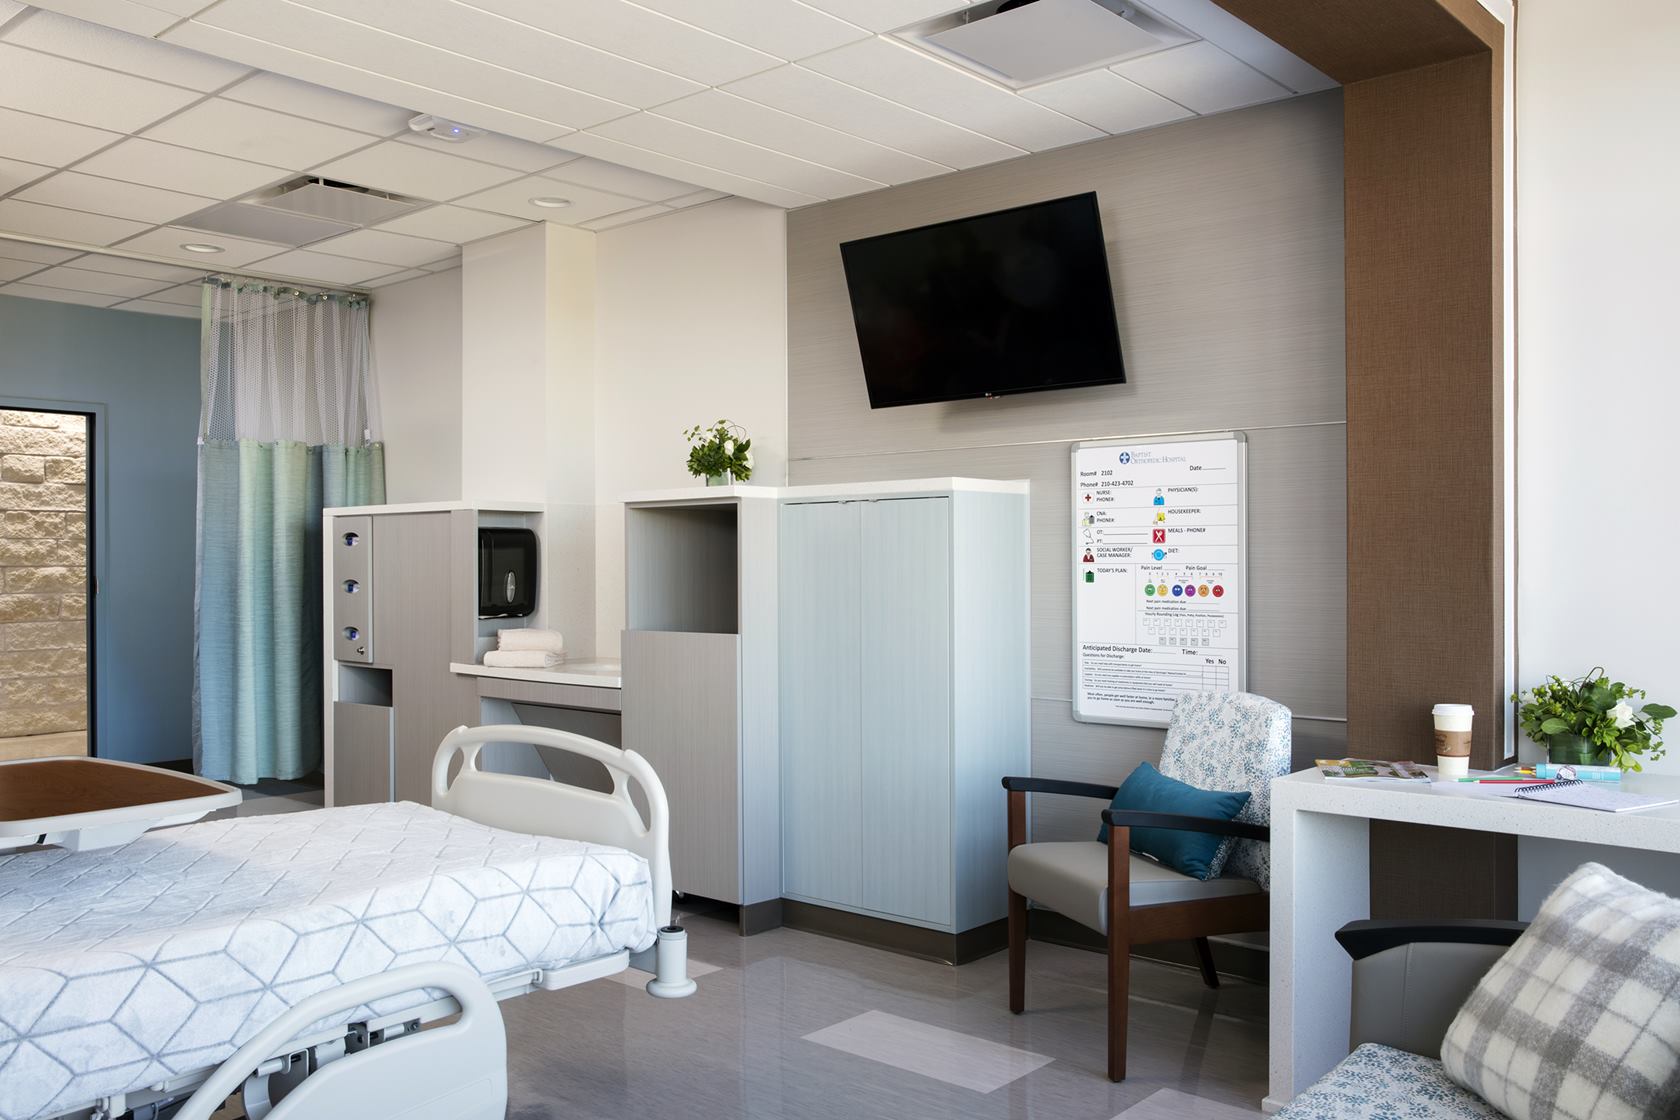 Patient room at North Central Baptist Orthopedic Hospital